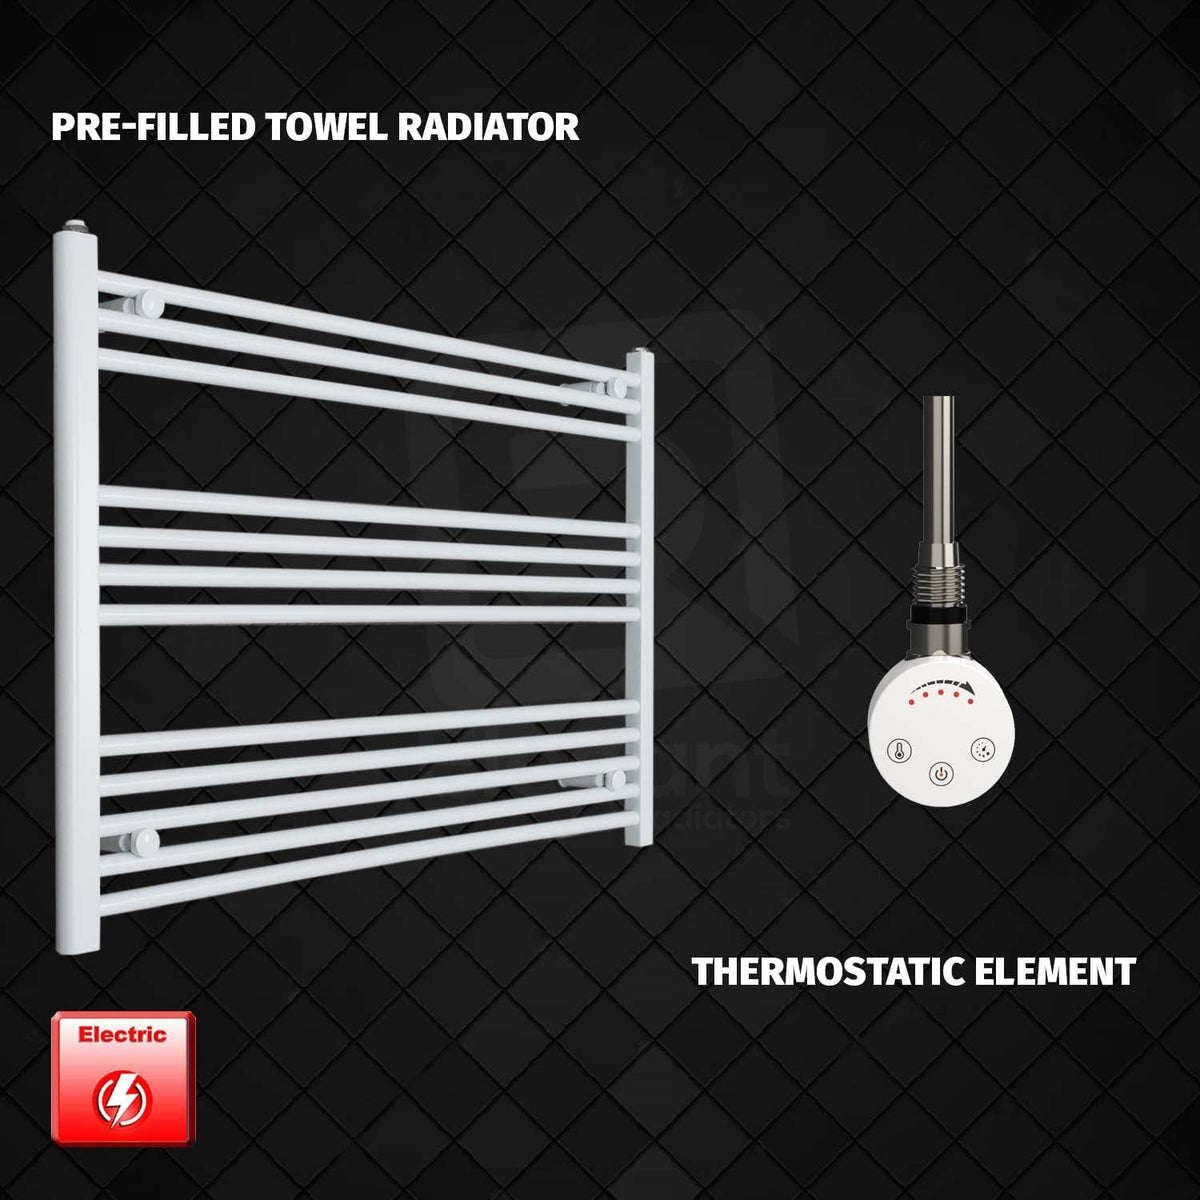 700 mm High 1000 mm Wide Pre-Filled Electric Heated Towel Rail Radiator White HTR SMR Thermostatic element no timer